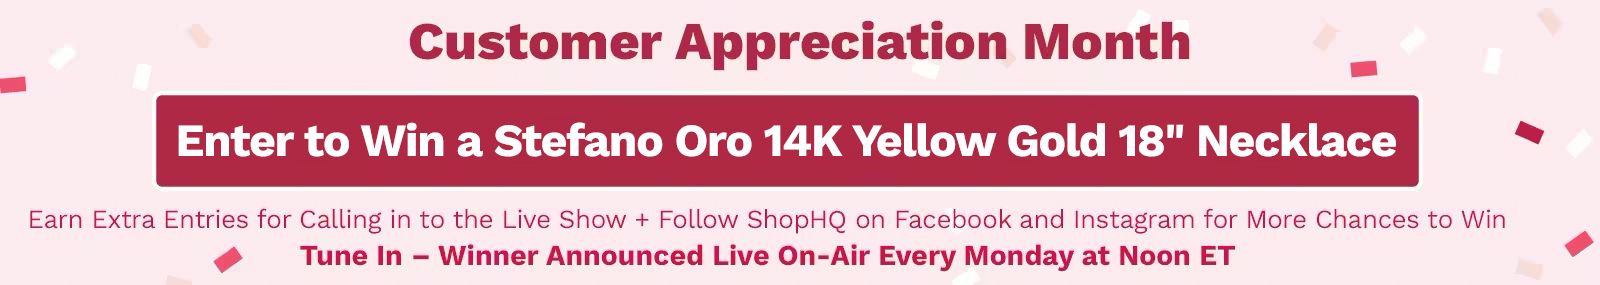 Customer Appreciation Month | Enter to Win Stefano Oro 14K Yellow Gold 18 Necklace